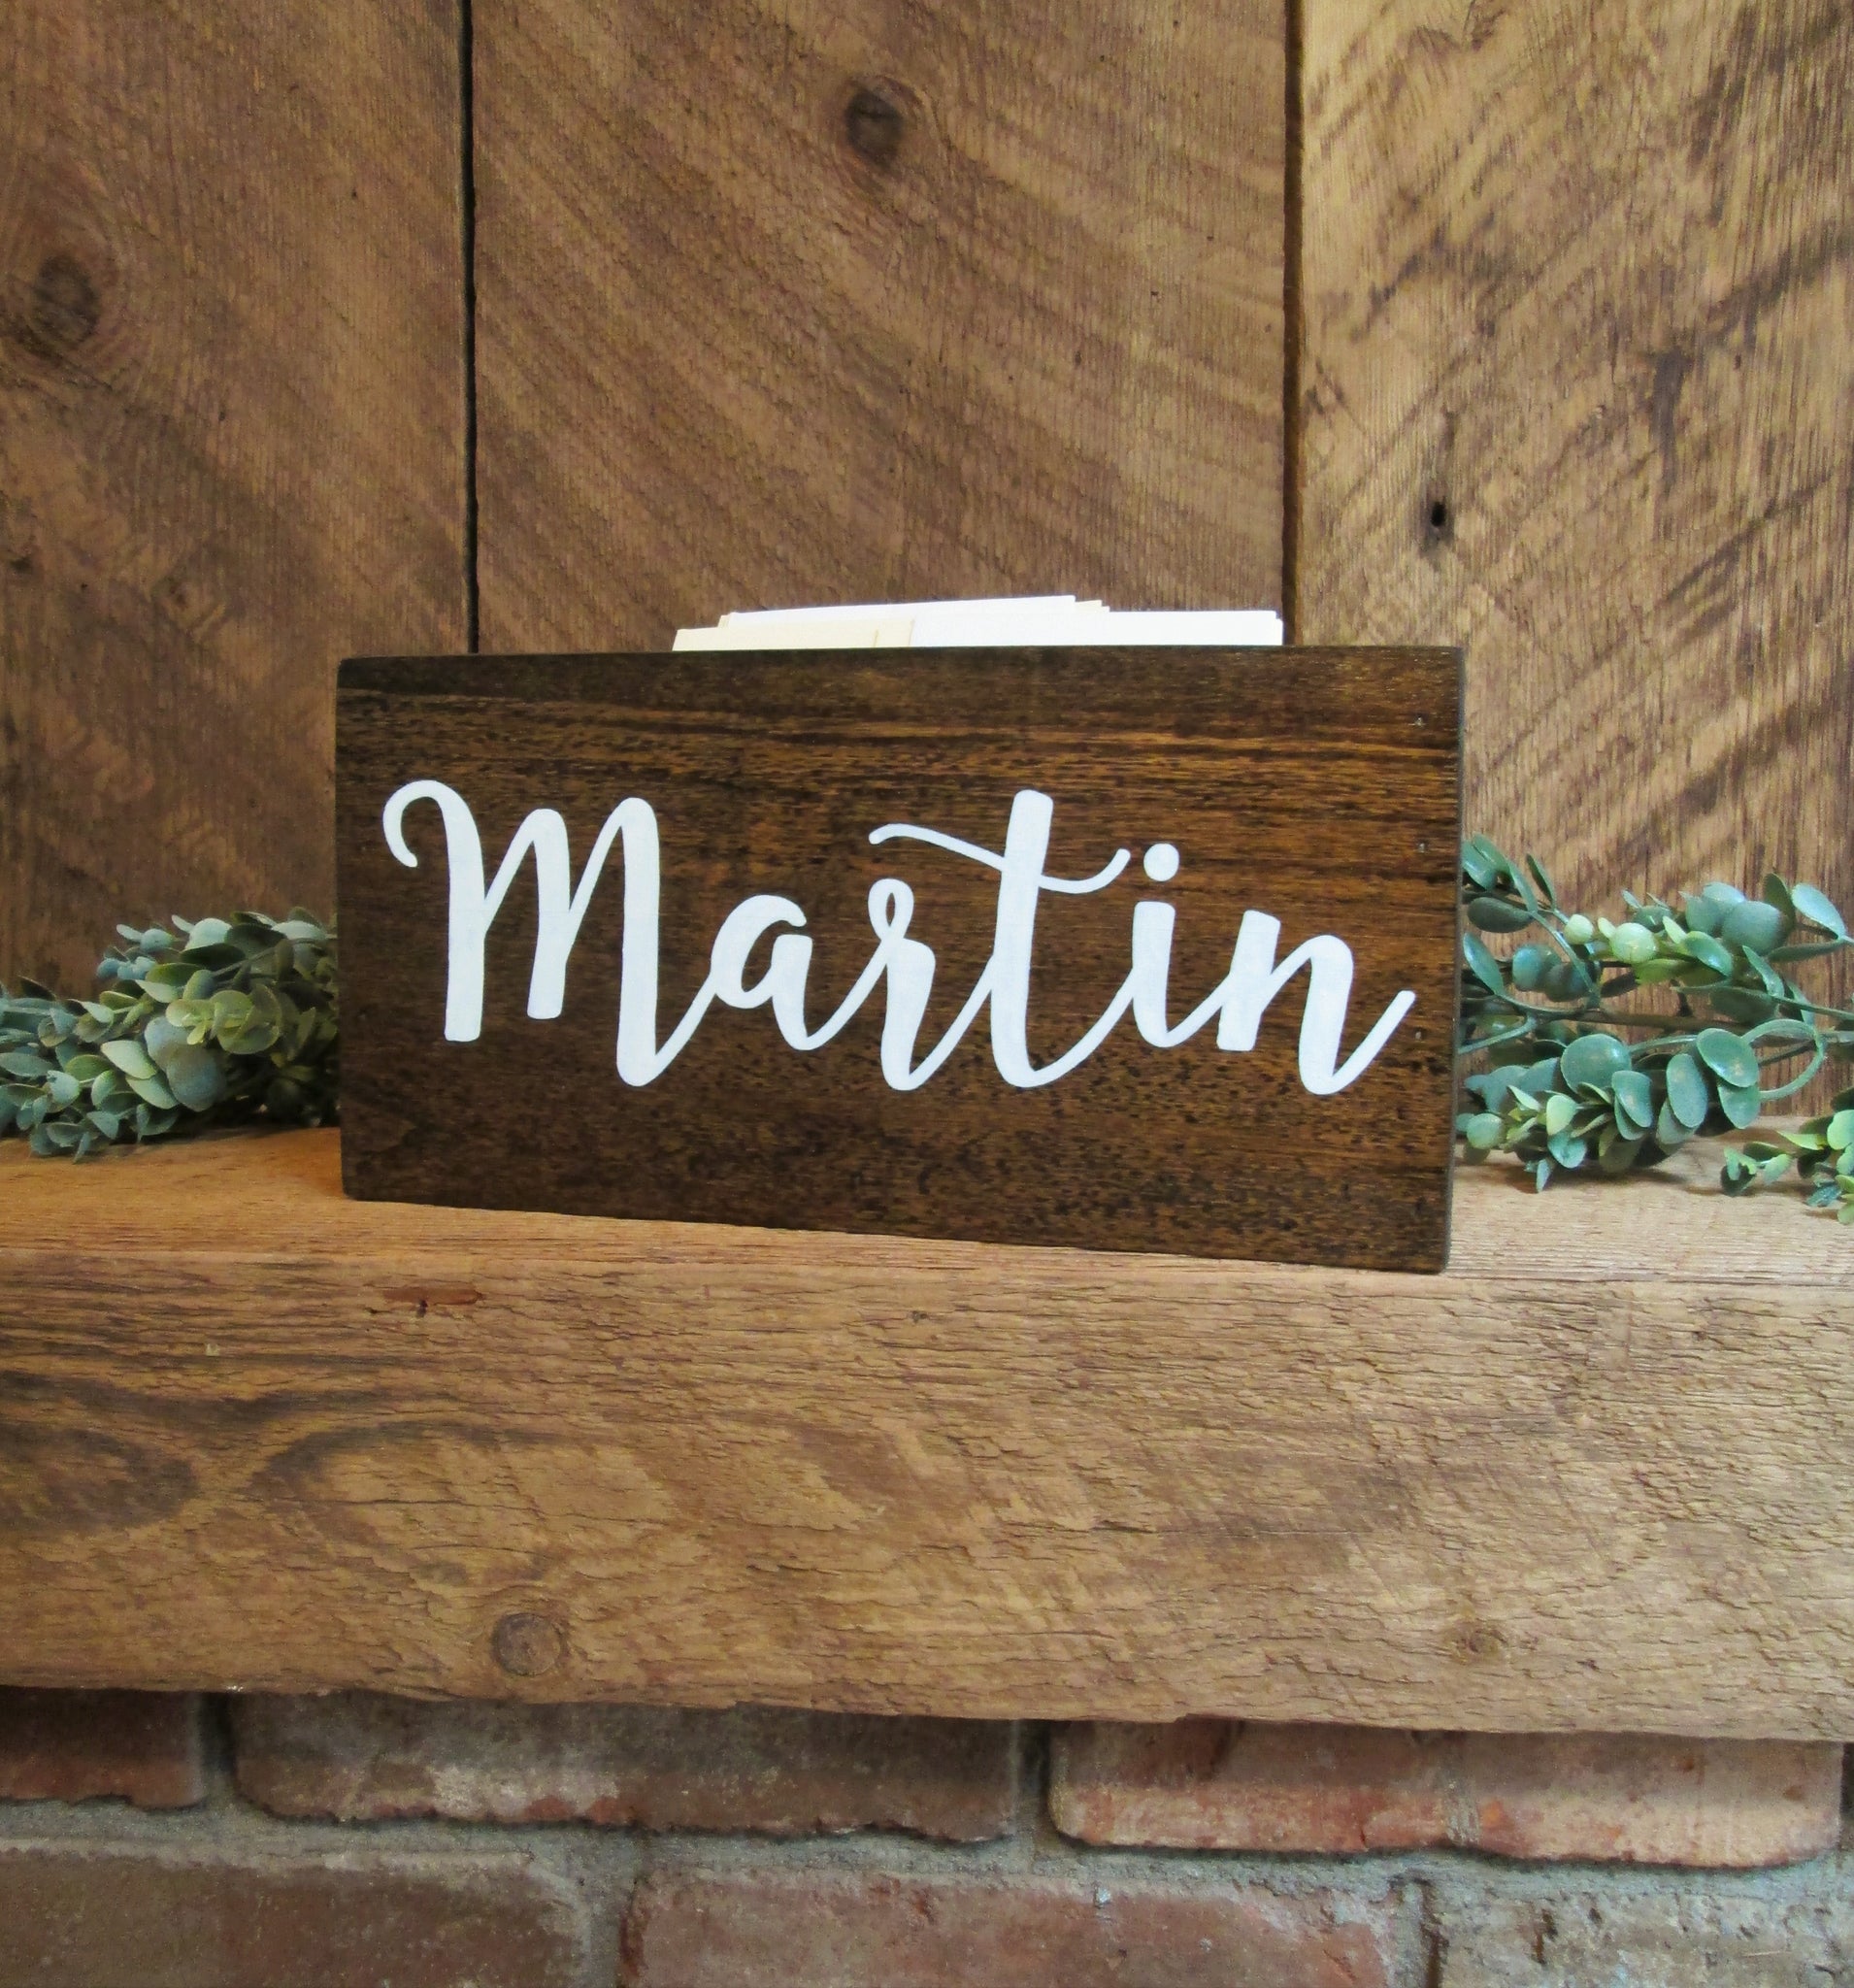 Personalized Wooden Cards Box - Wedding Decor by Perryhill Rustics